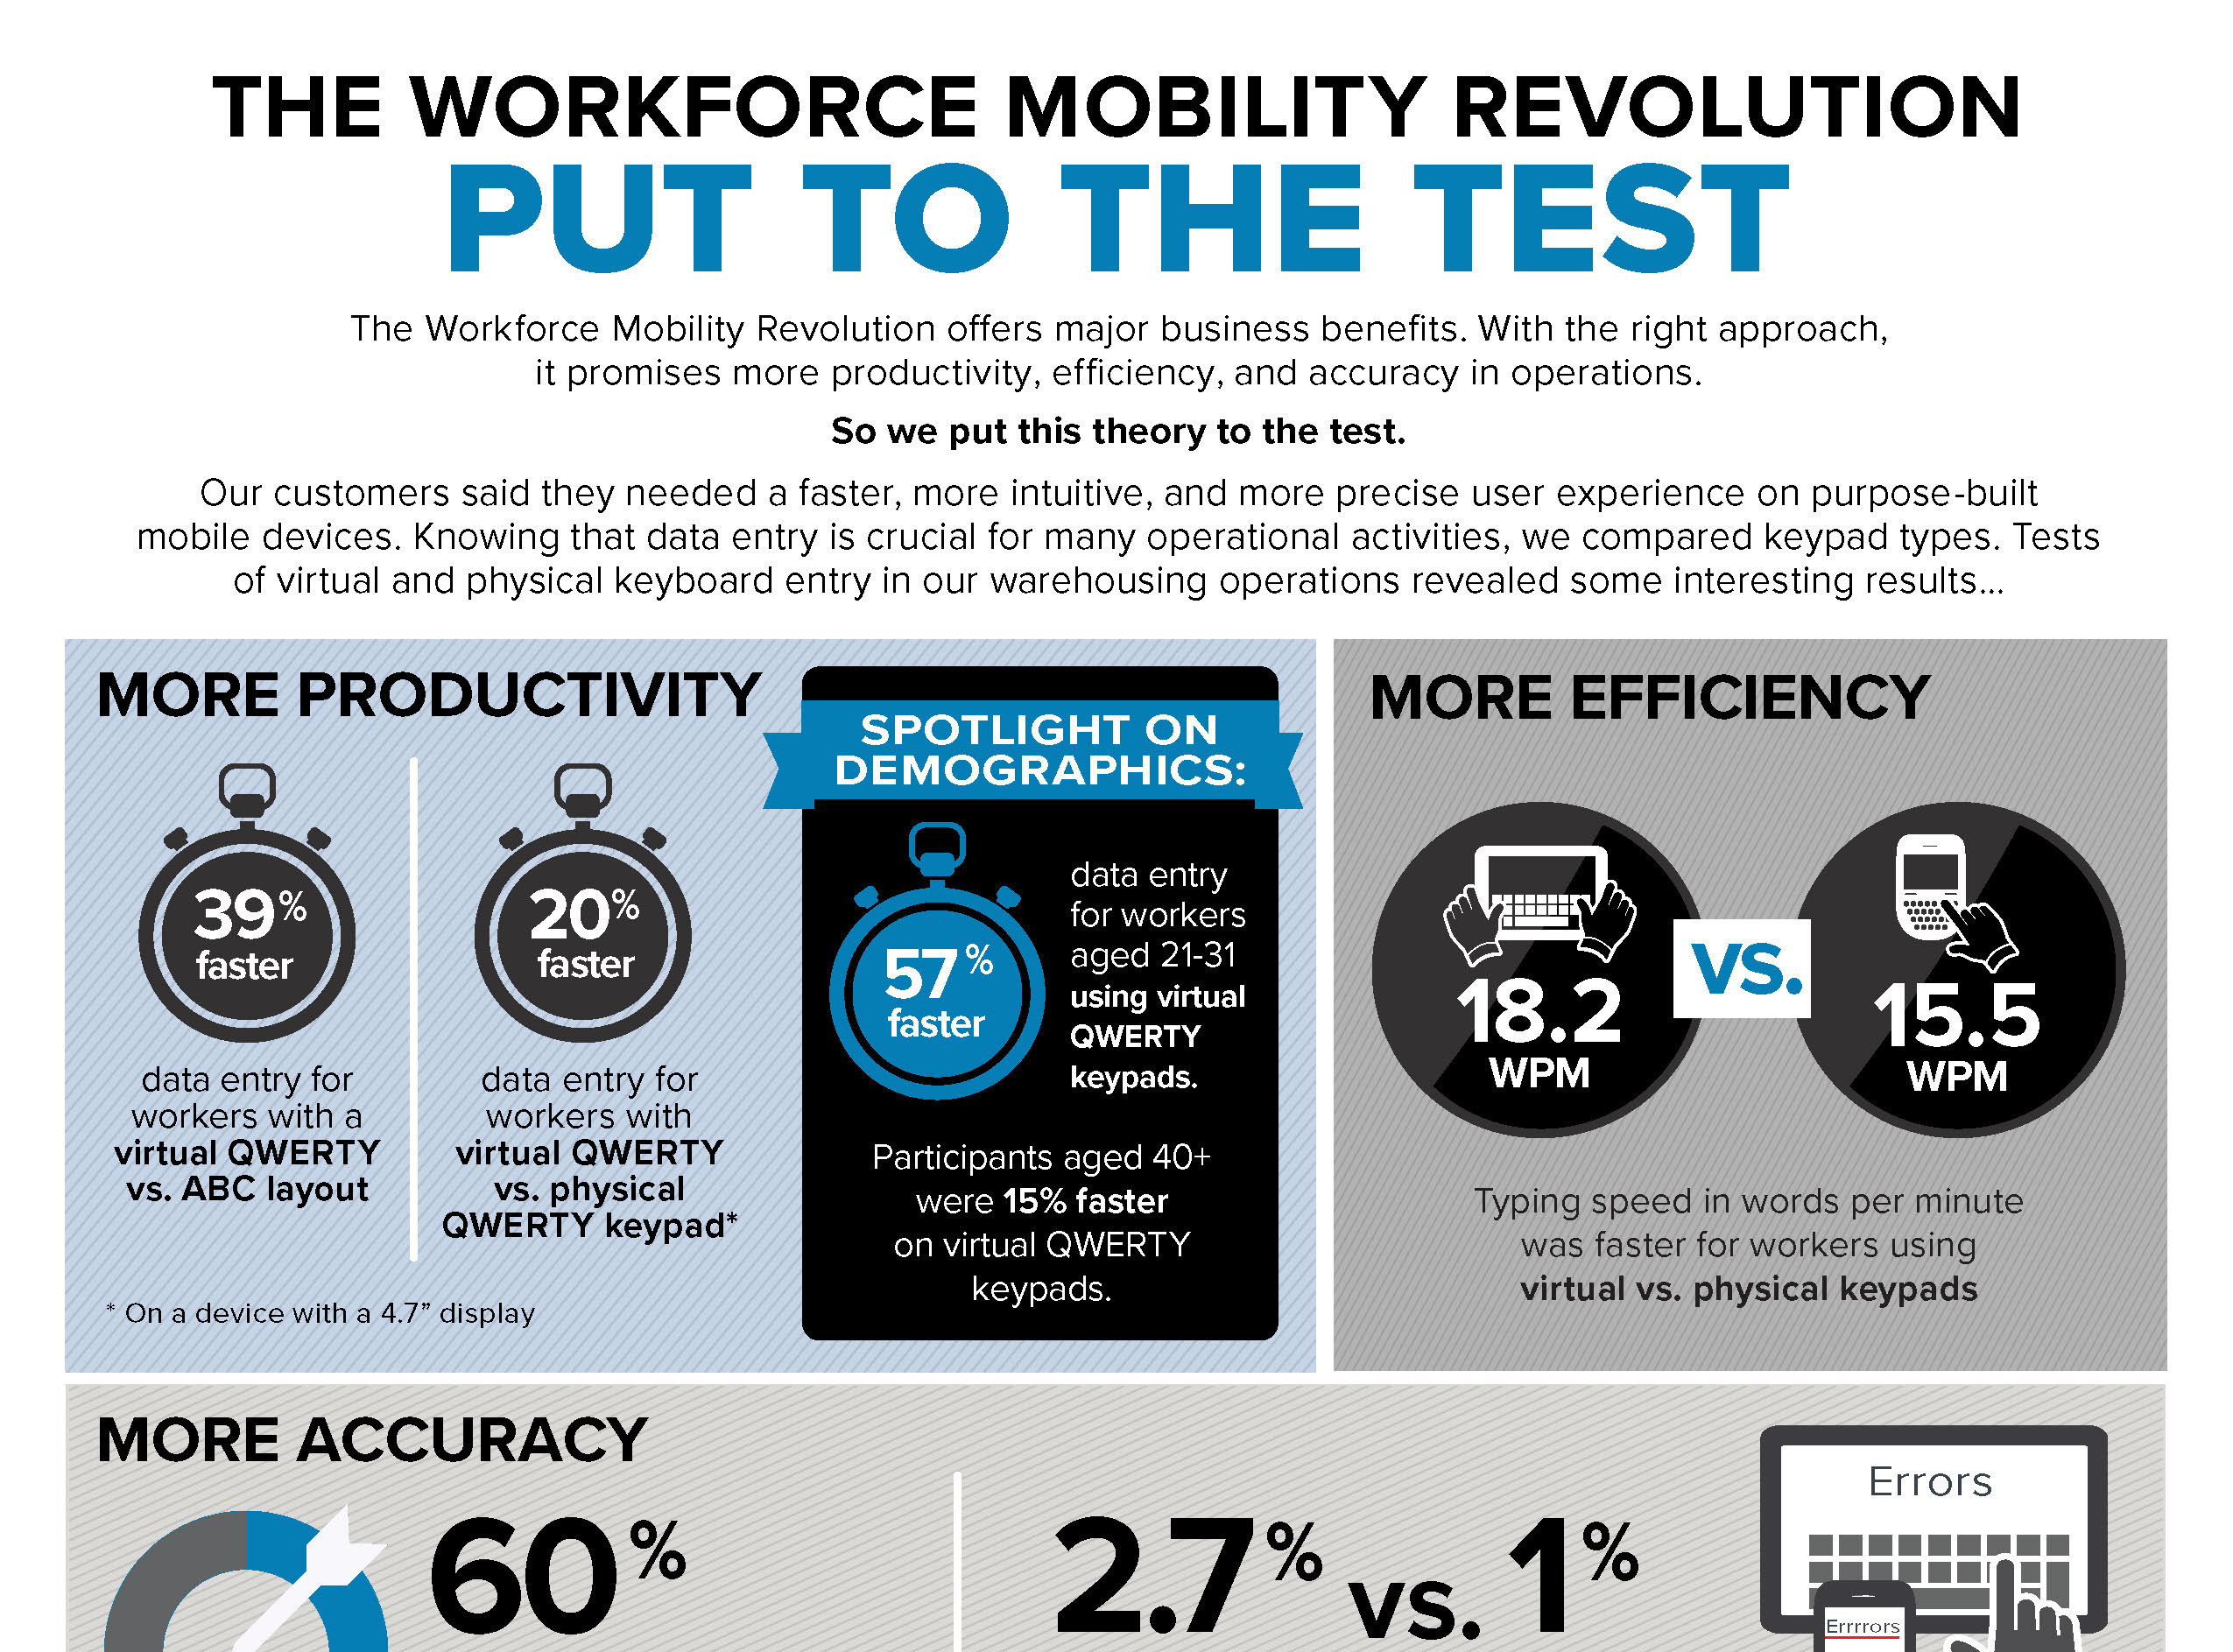 THE WORKFORCE MOBILITY REVOLUTION PUT TO THE TEST